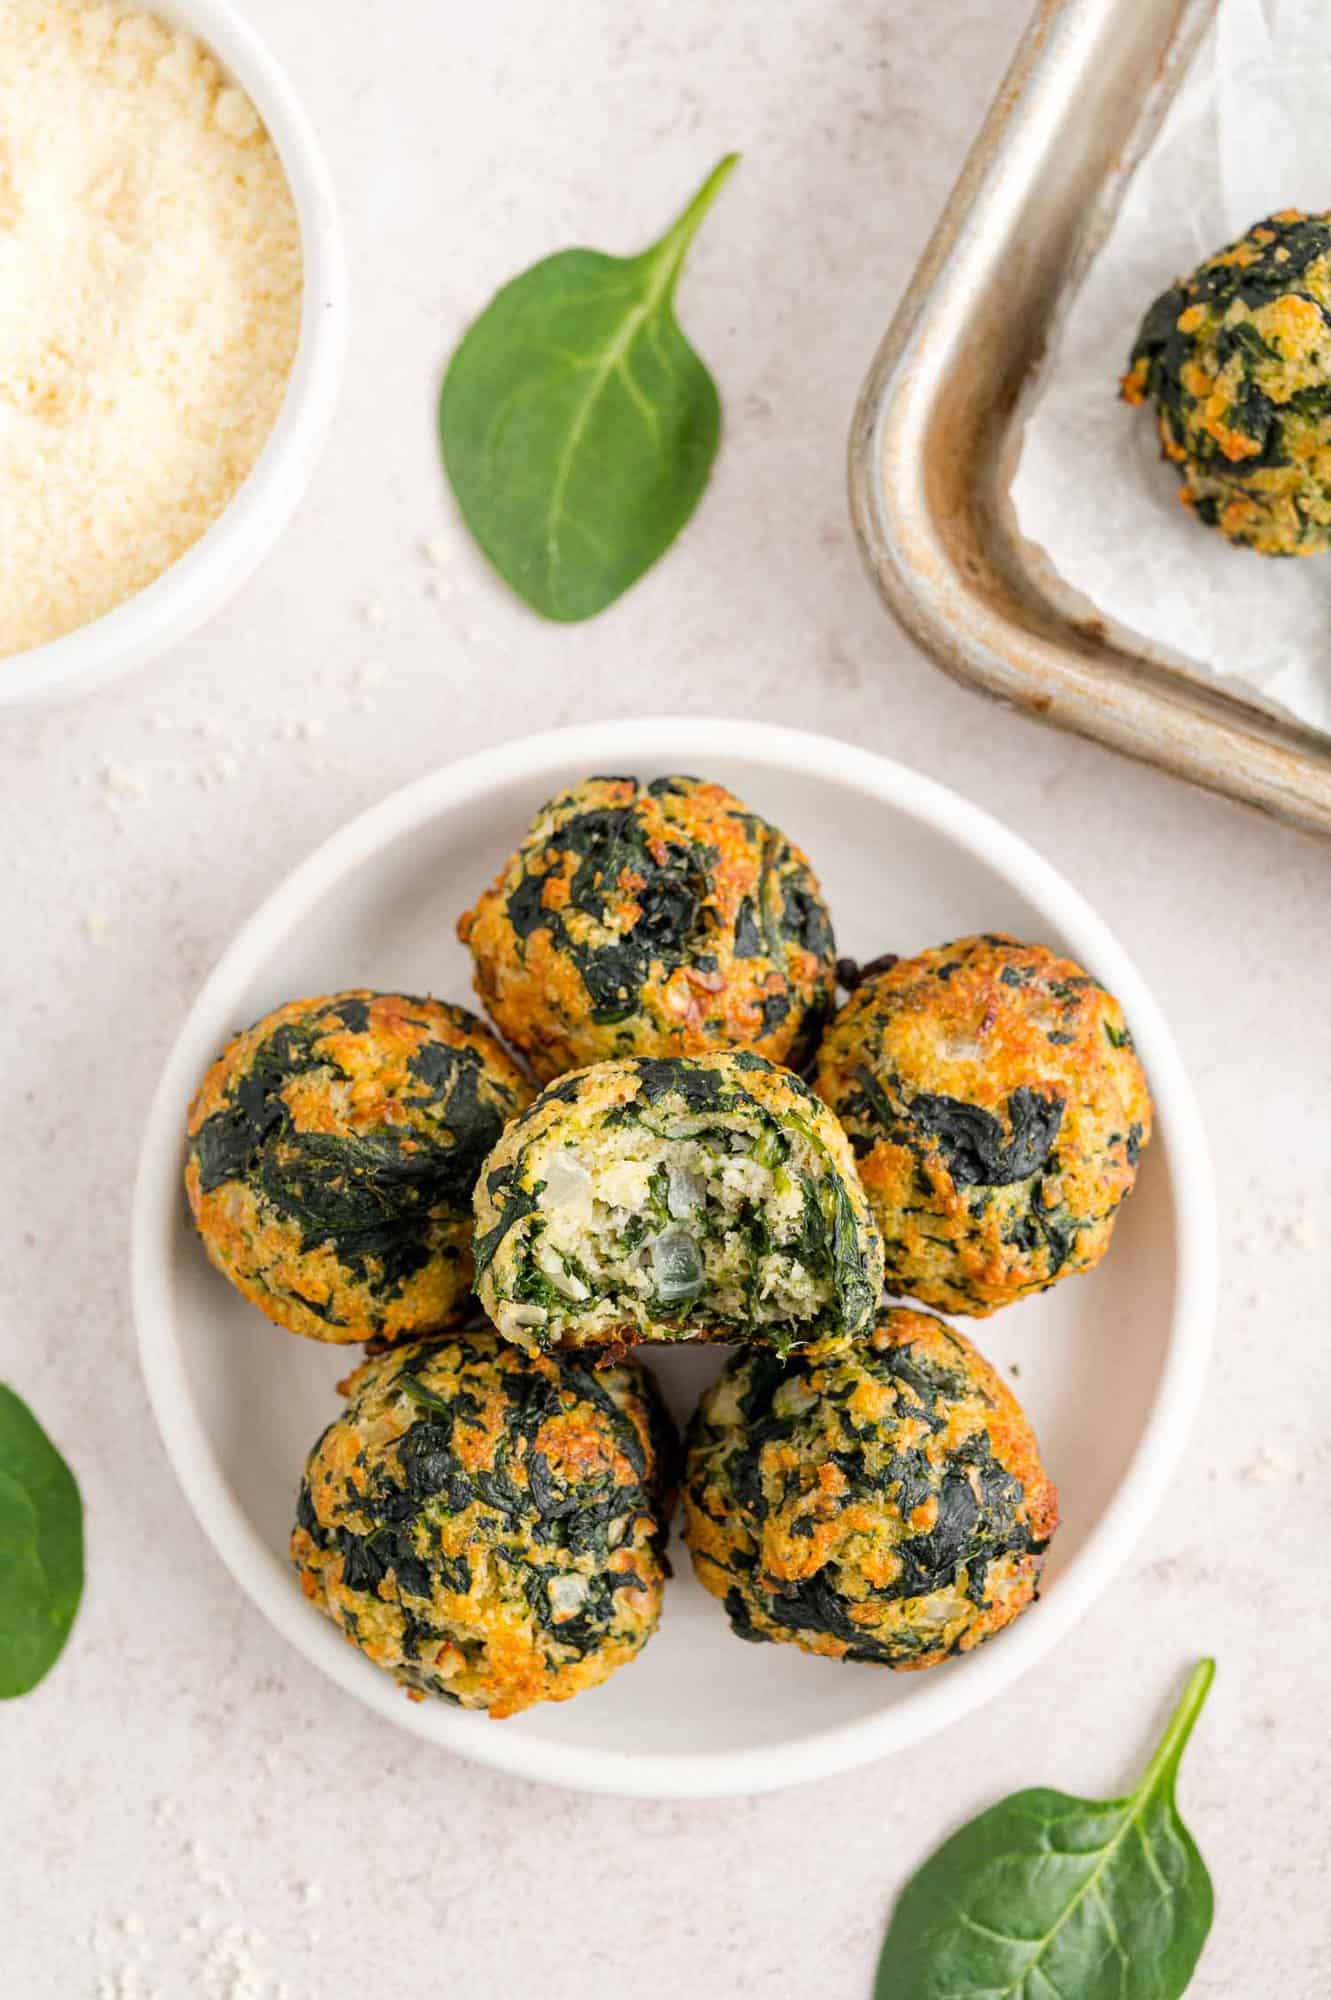 Overhead view of spinach balls stacked on a white plate, with a bite missing from the top spinach ball, next to a bowl of dipping sauce and the corner of a baking sheet.